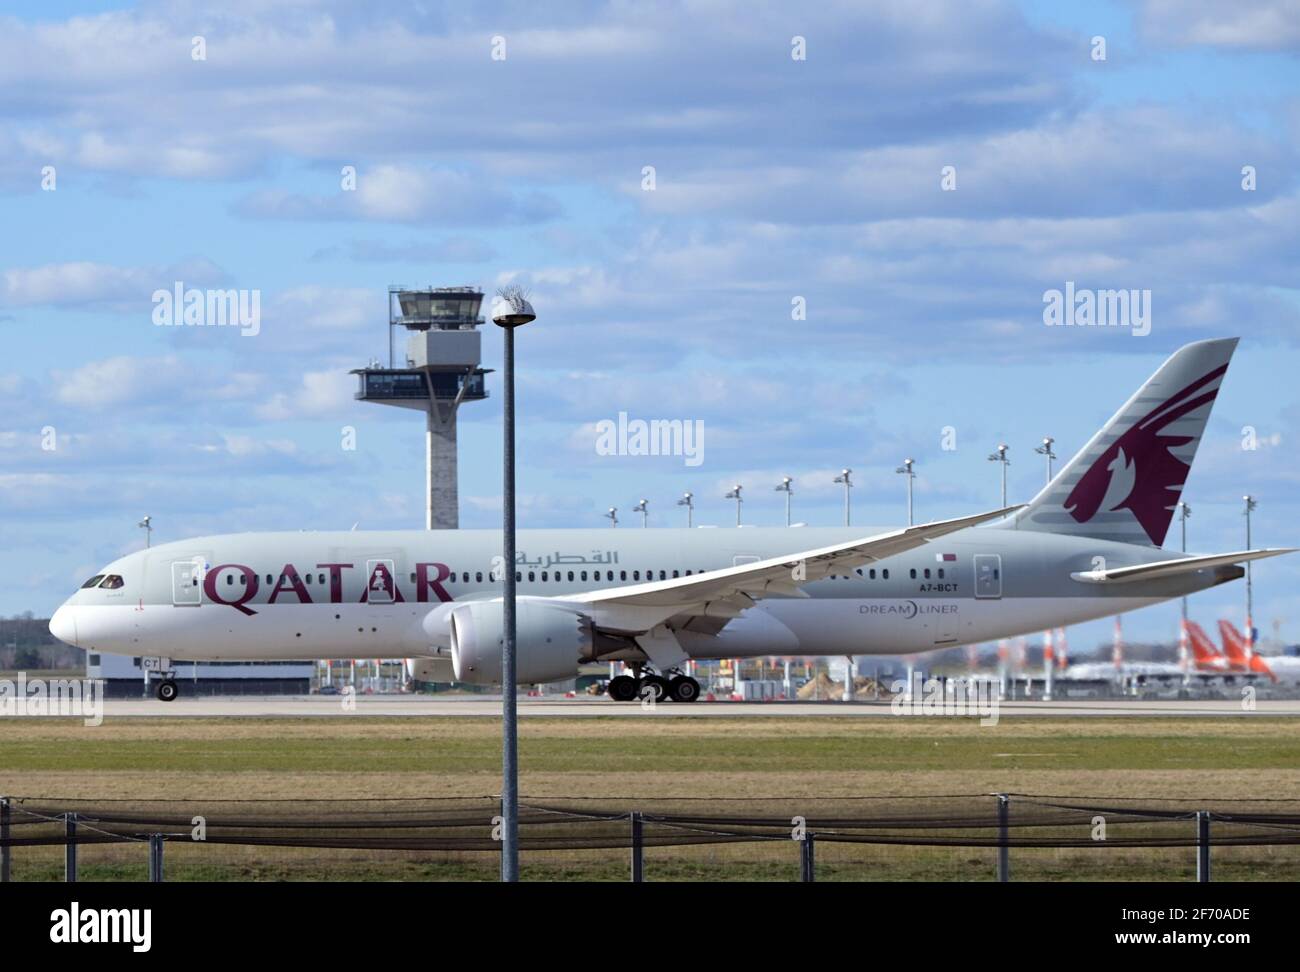 03 April 2021, Brandenburg, Schönefeld: A Boeing 787 Dreamliner of the airline Qatar Airways takes off from the southern runway of Berlin Brandenburg Airport 'Willy Brandt' in the direction of Doha. Since the beginning of April 2021, both runways have been used in monthly rotation in order to distribute aircraft noise pollution more evenly in the region. Photo: Soeren Stache/dpa-Zentralbild/ZB Stock Photo